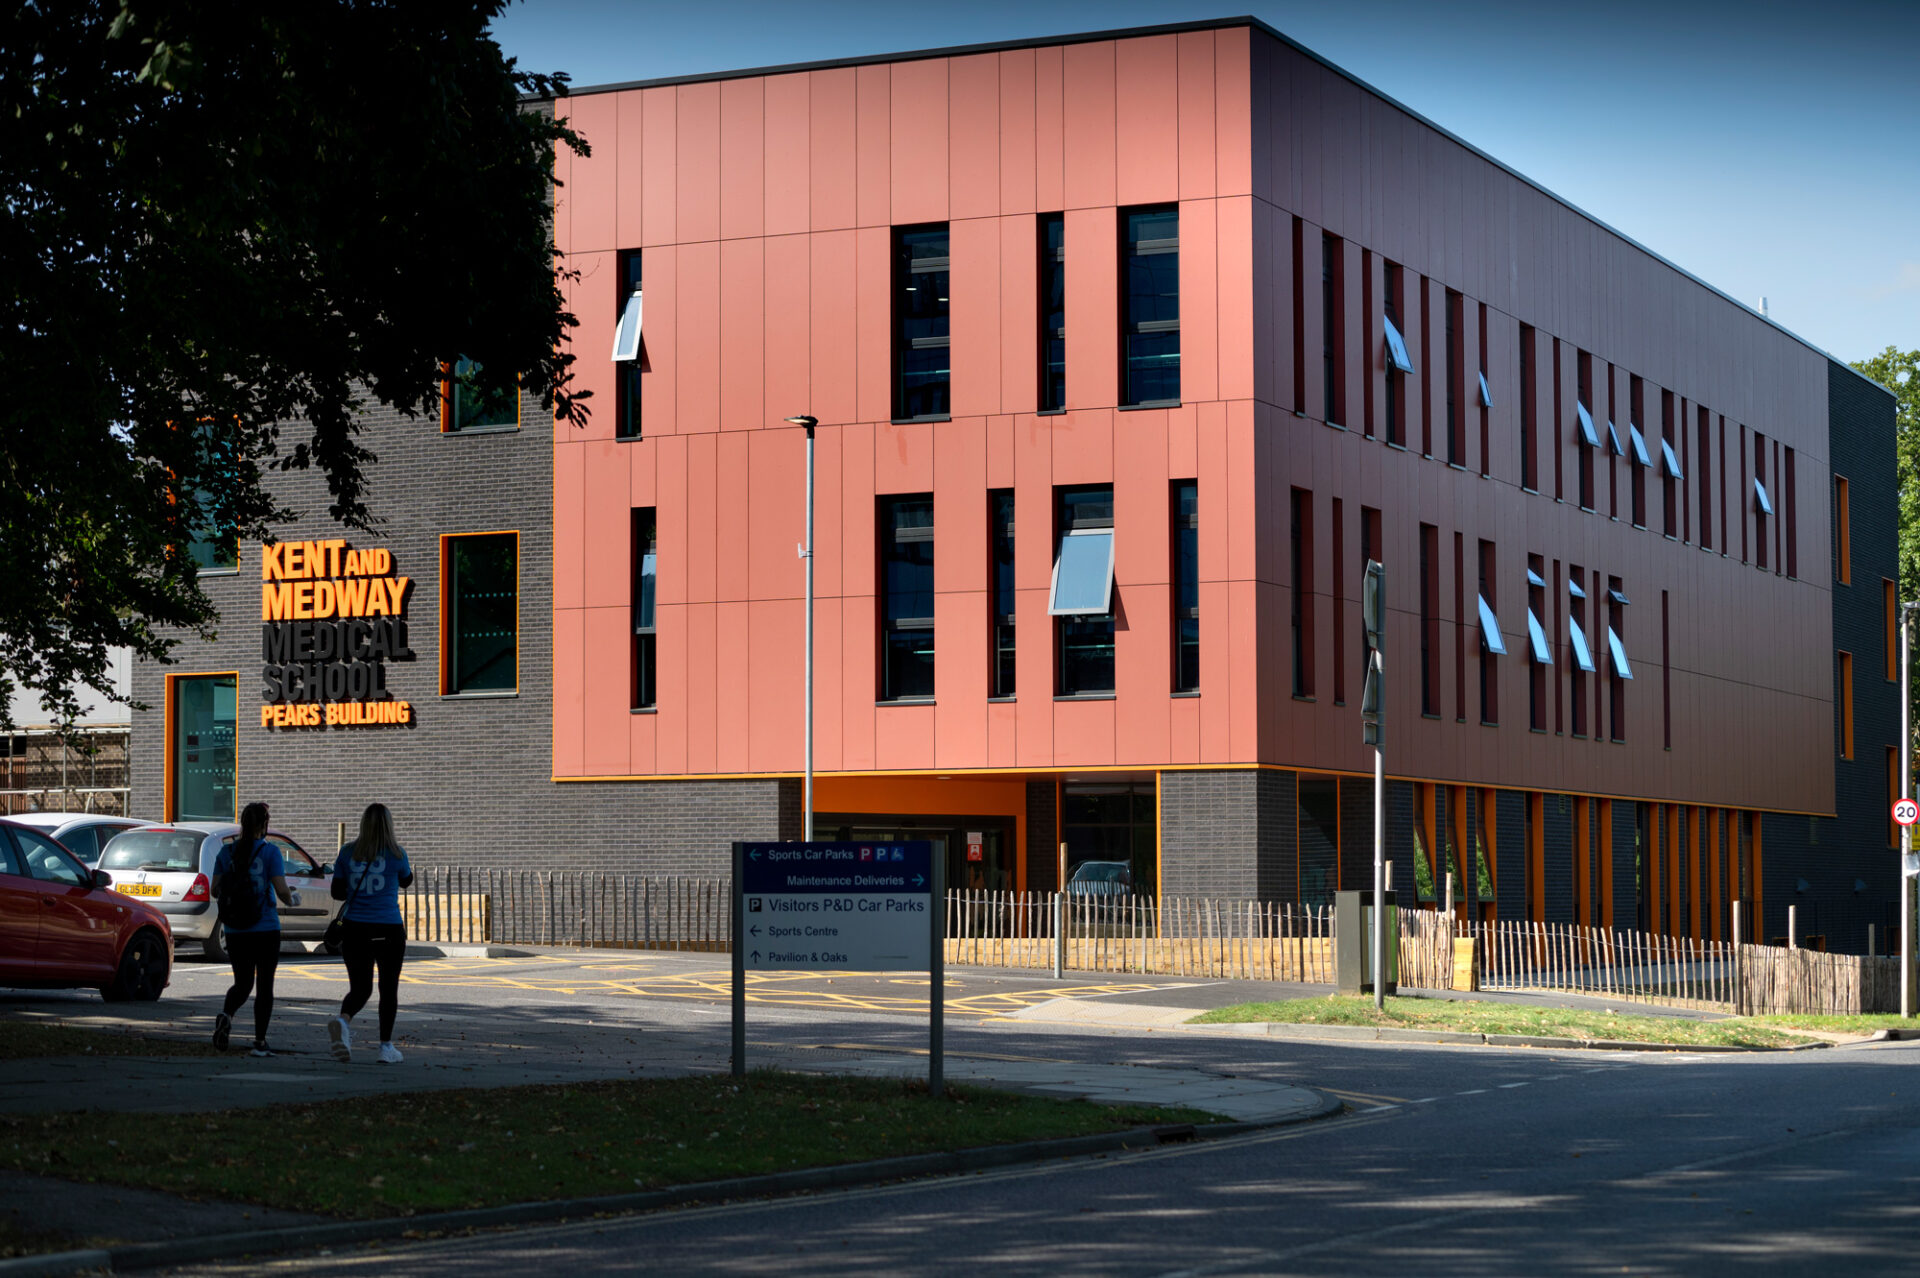 Image of the pears building at the University of Kent